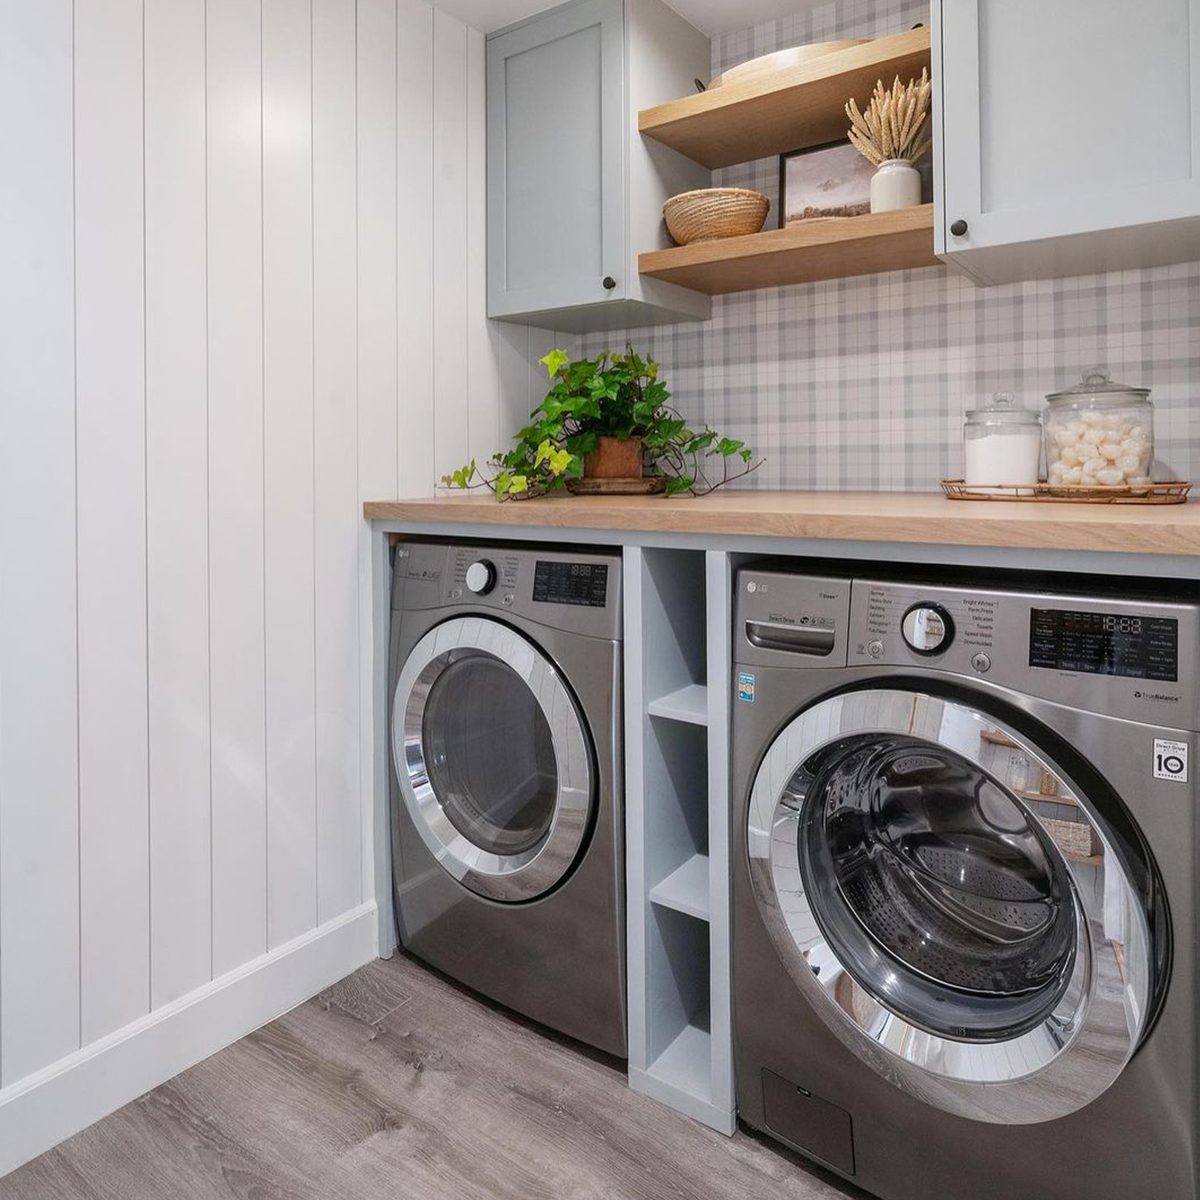 10 Laundry Room Designs You'll Be Obsessed With